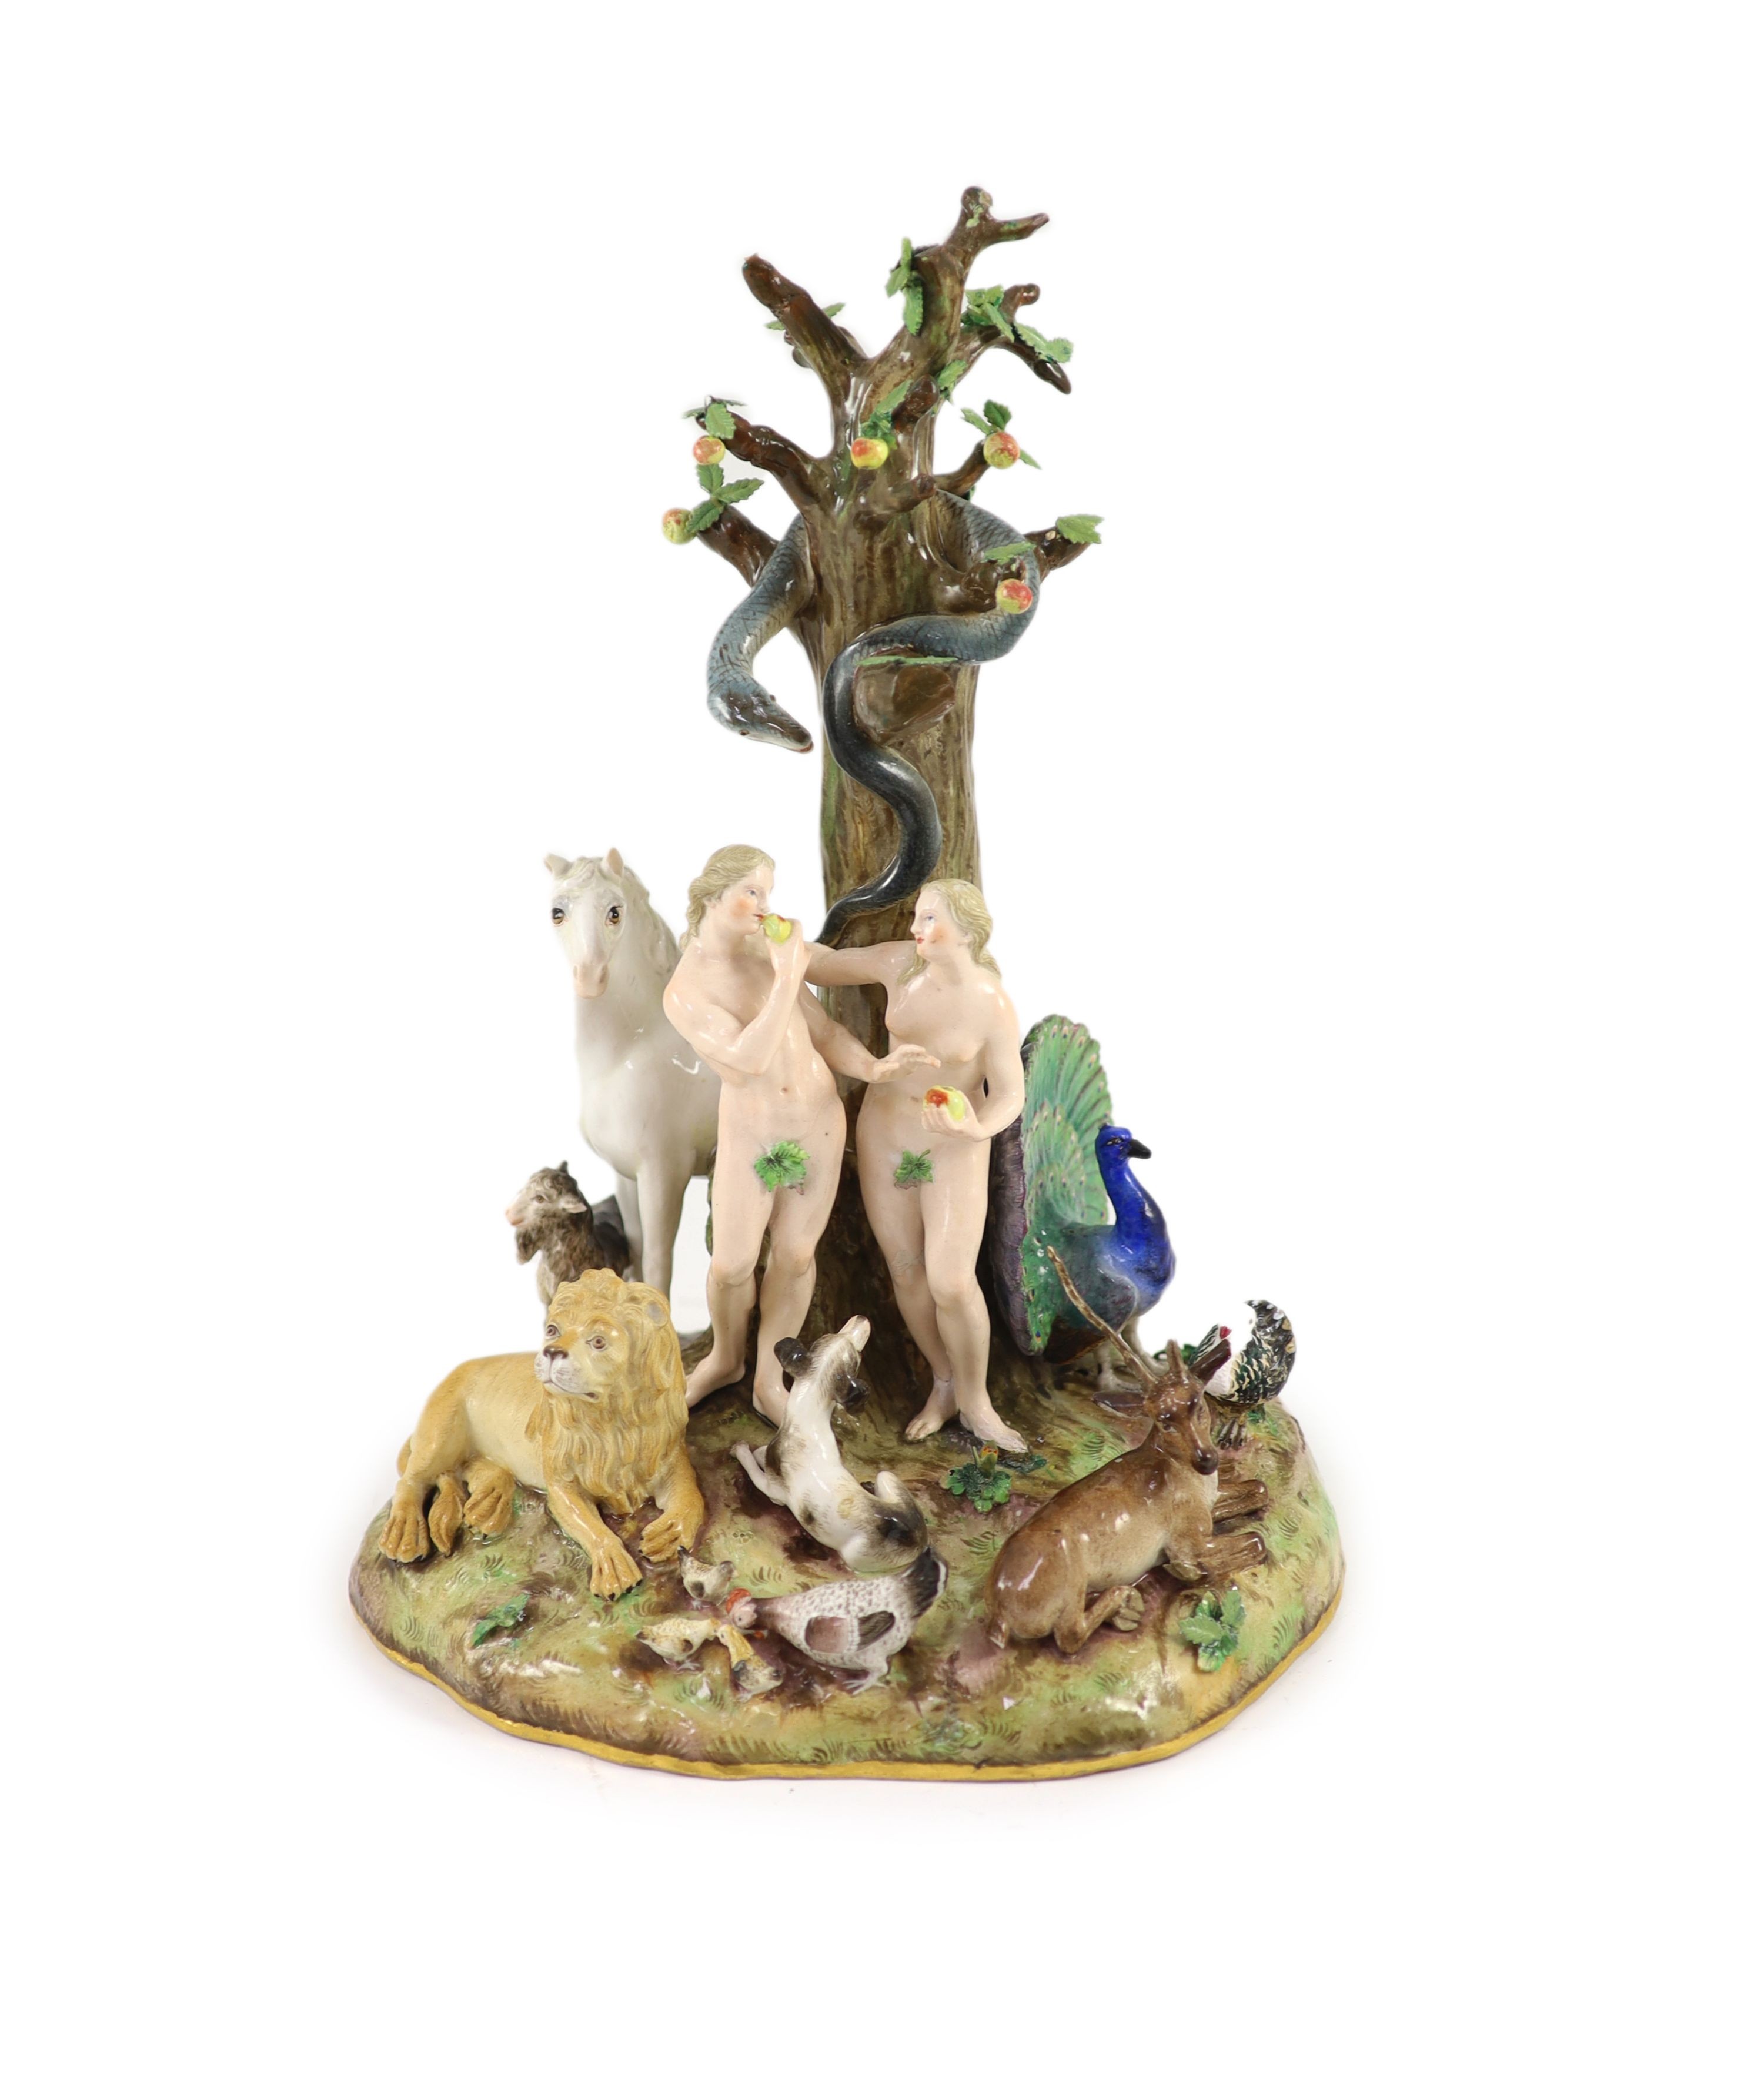 A Meissen figural group of the Garden of Eden, 19th century, 32 cm high, losses and restoration